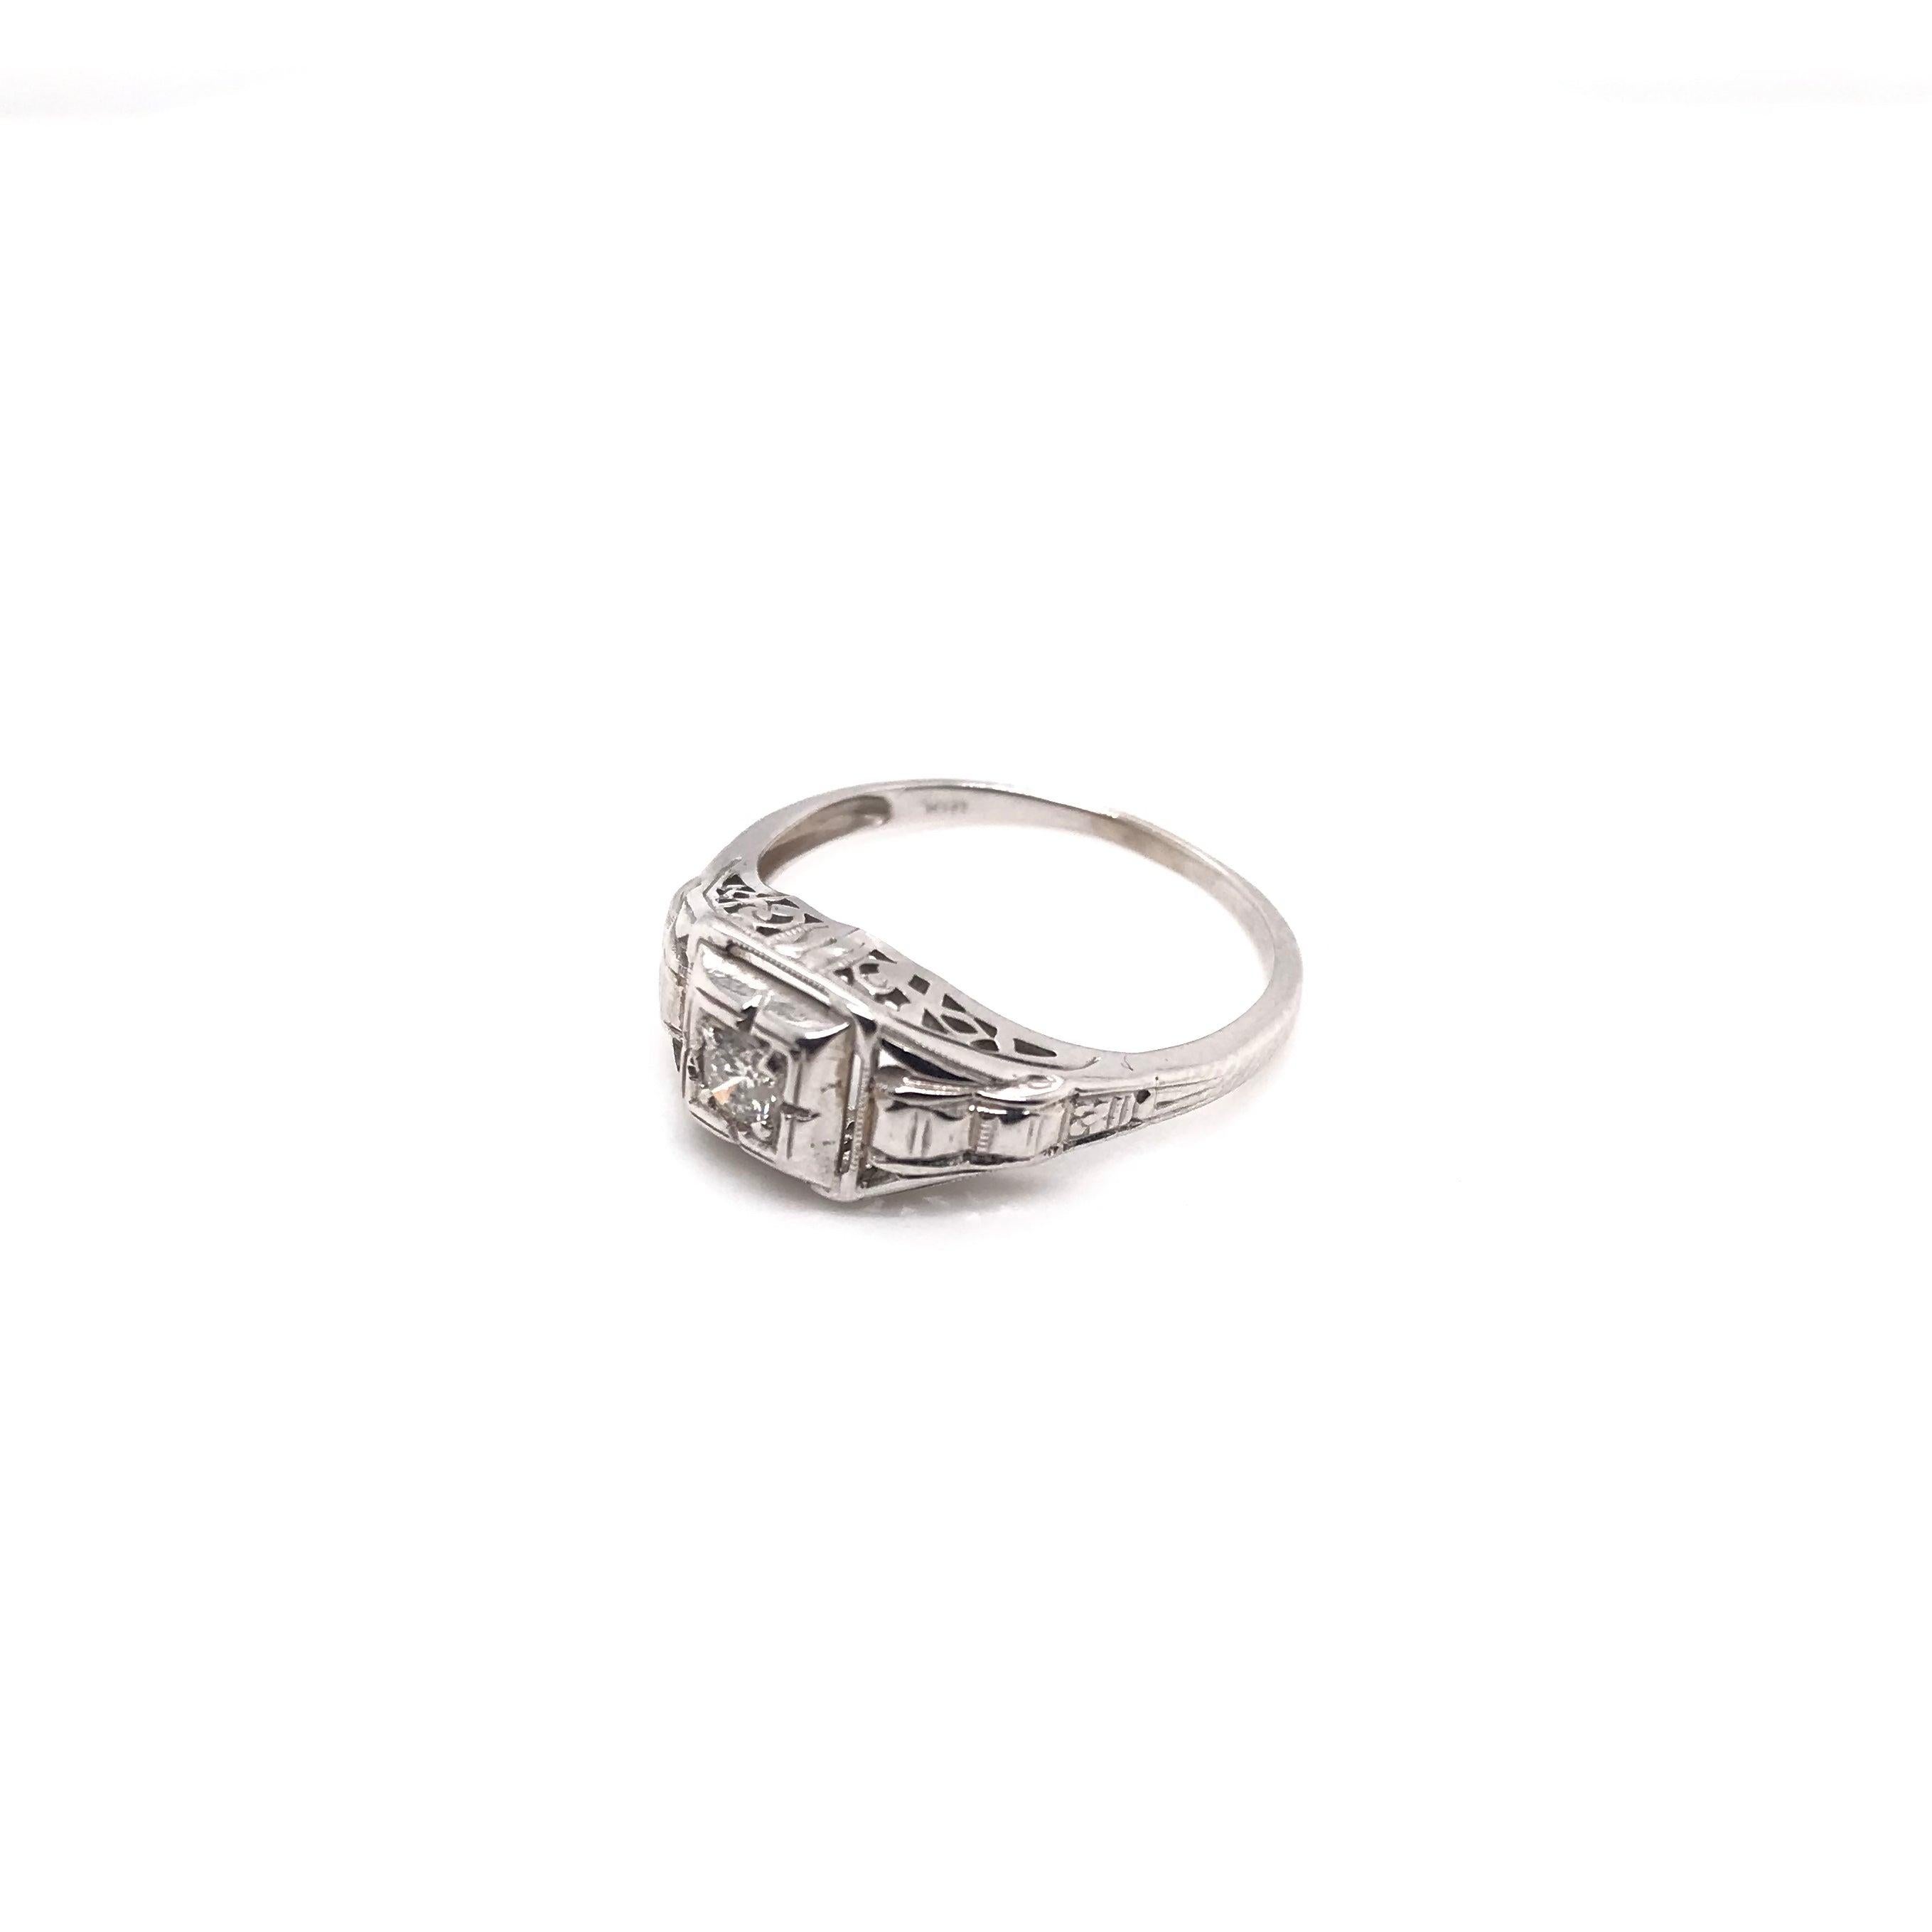 This antique piece was handcrafted sometime during the Art Deco design period ( 1920-1940 ). This antique ring features many charming details. The 18k white gold setting features a small sparkling diamond accent in the center. The ring has beautiful